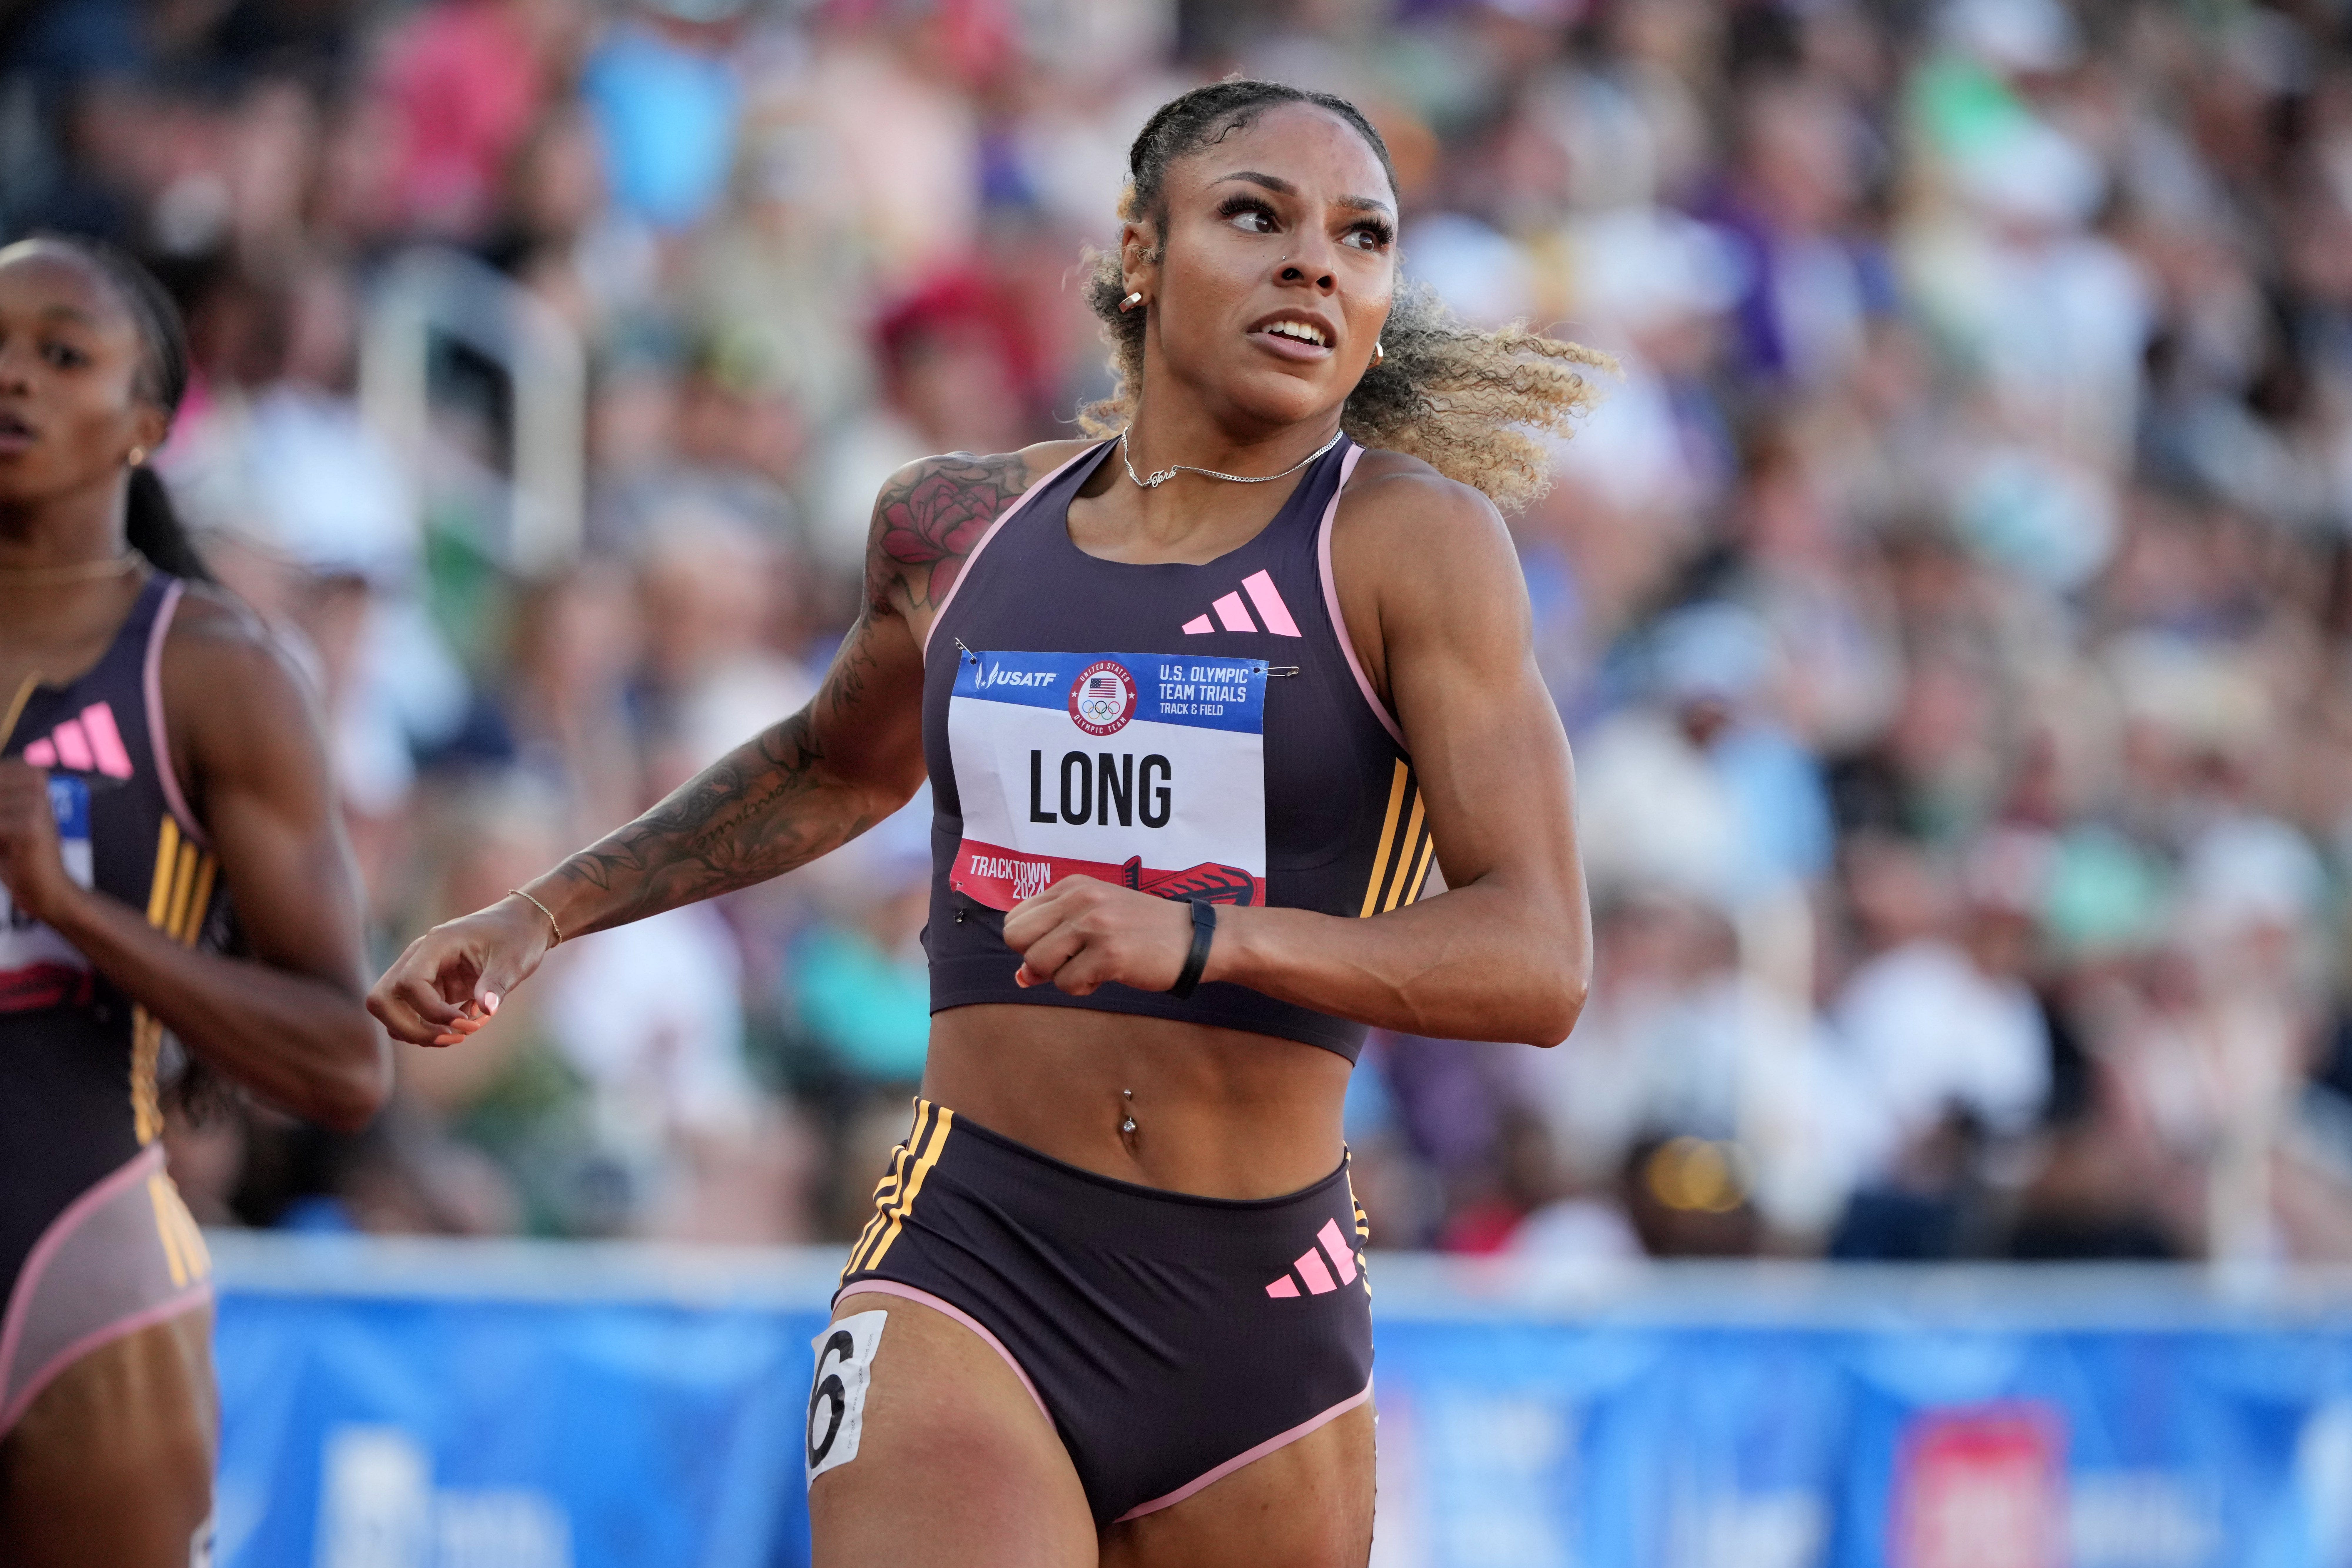 McKenzie Long, inspired by mom, earns spot in 200 for Paris